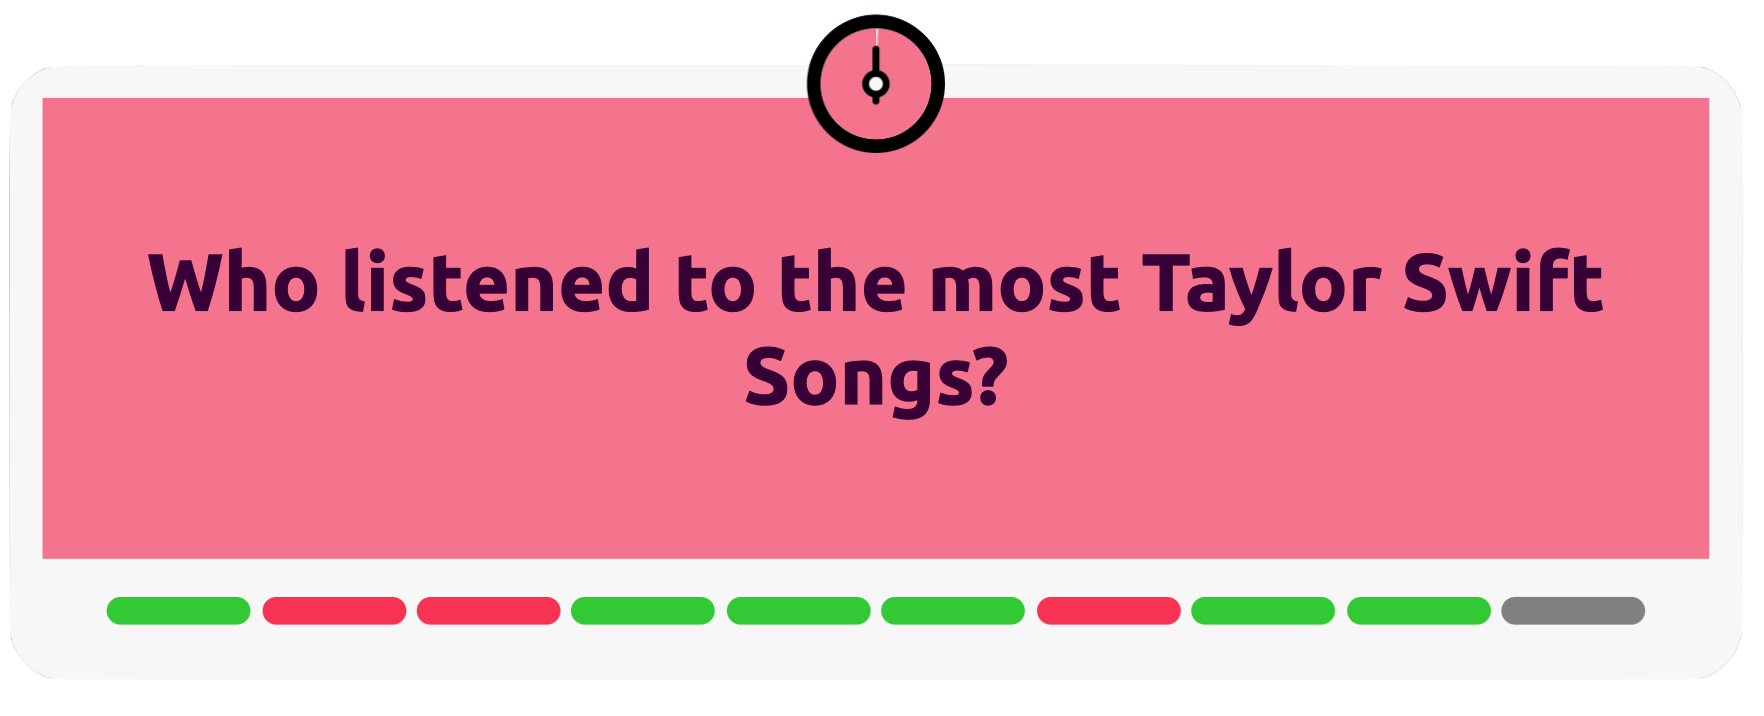 Who listened to the most Taylor Swift Songs?